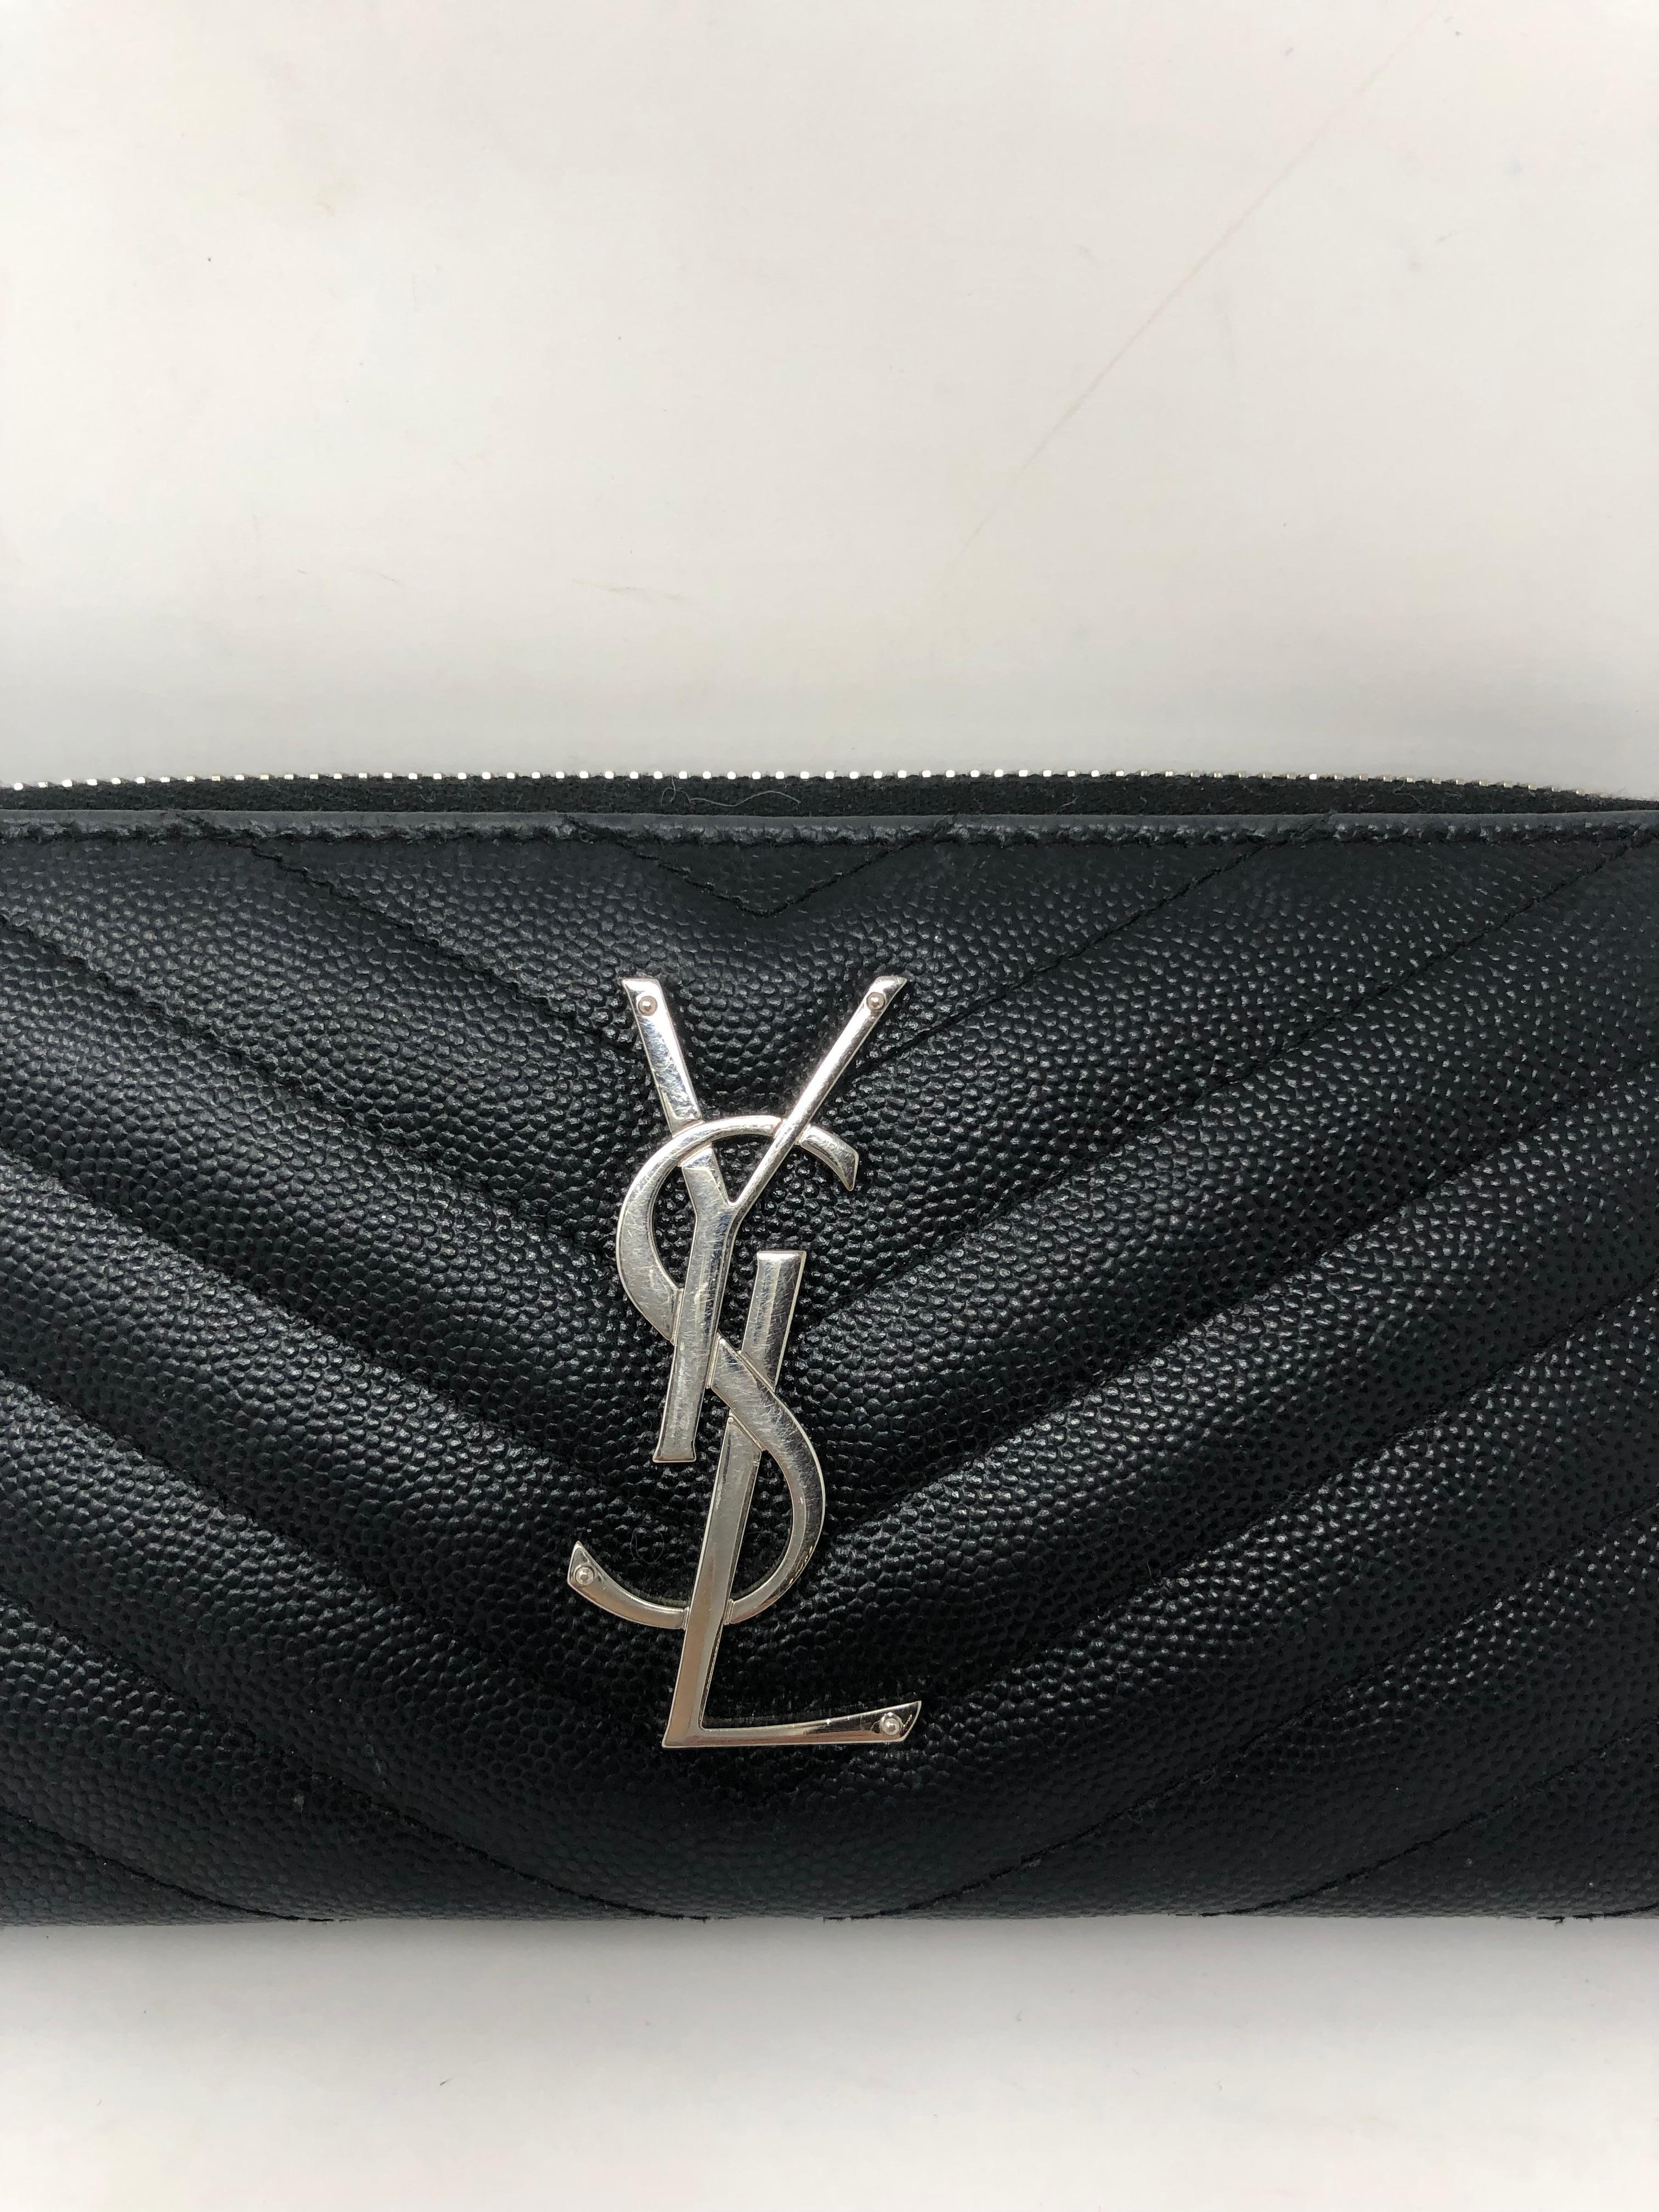 YSL Black Leather Wallet. Silver hardware. Caviar leather zippy wallet. Mint like new condition. Can be worn as a clutch too. Guaranteed authentic. 